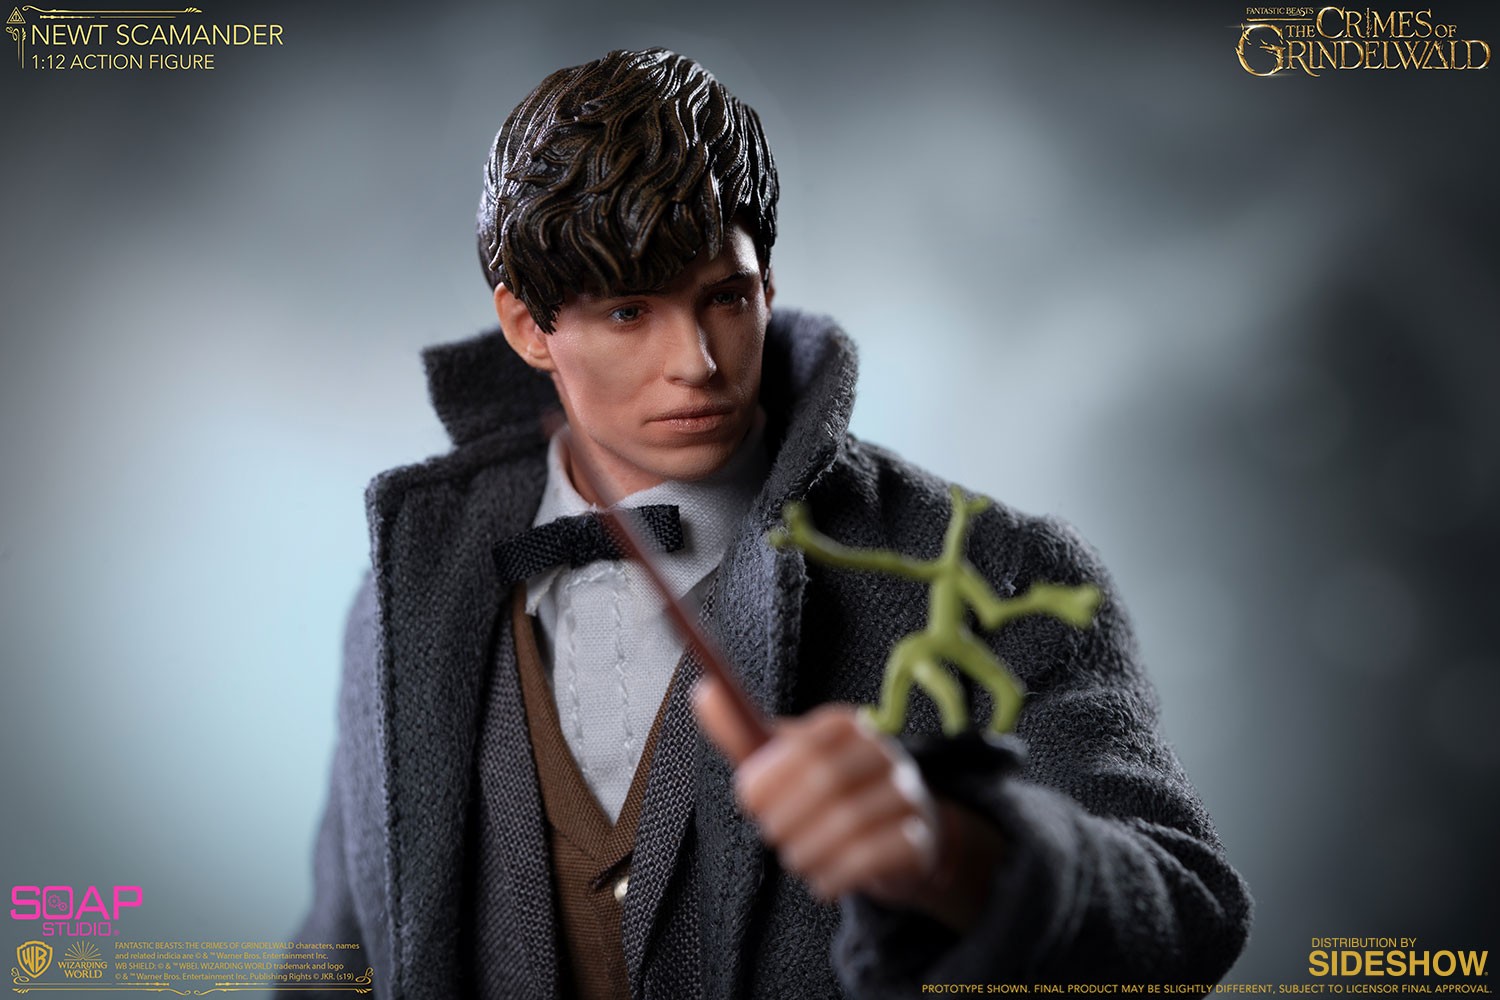  Fantastic Beasts The Crimes of Grindelwald Top Trumps Match  Board Game Multilingual Edition, Play with Niffler, Newt and Scamander,  family game for ages 4 and up : Toys & Games